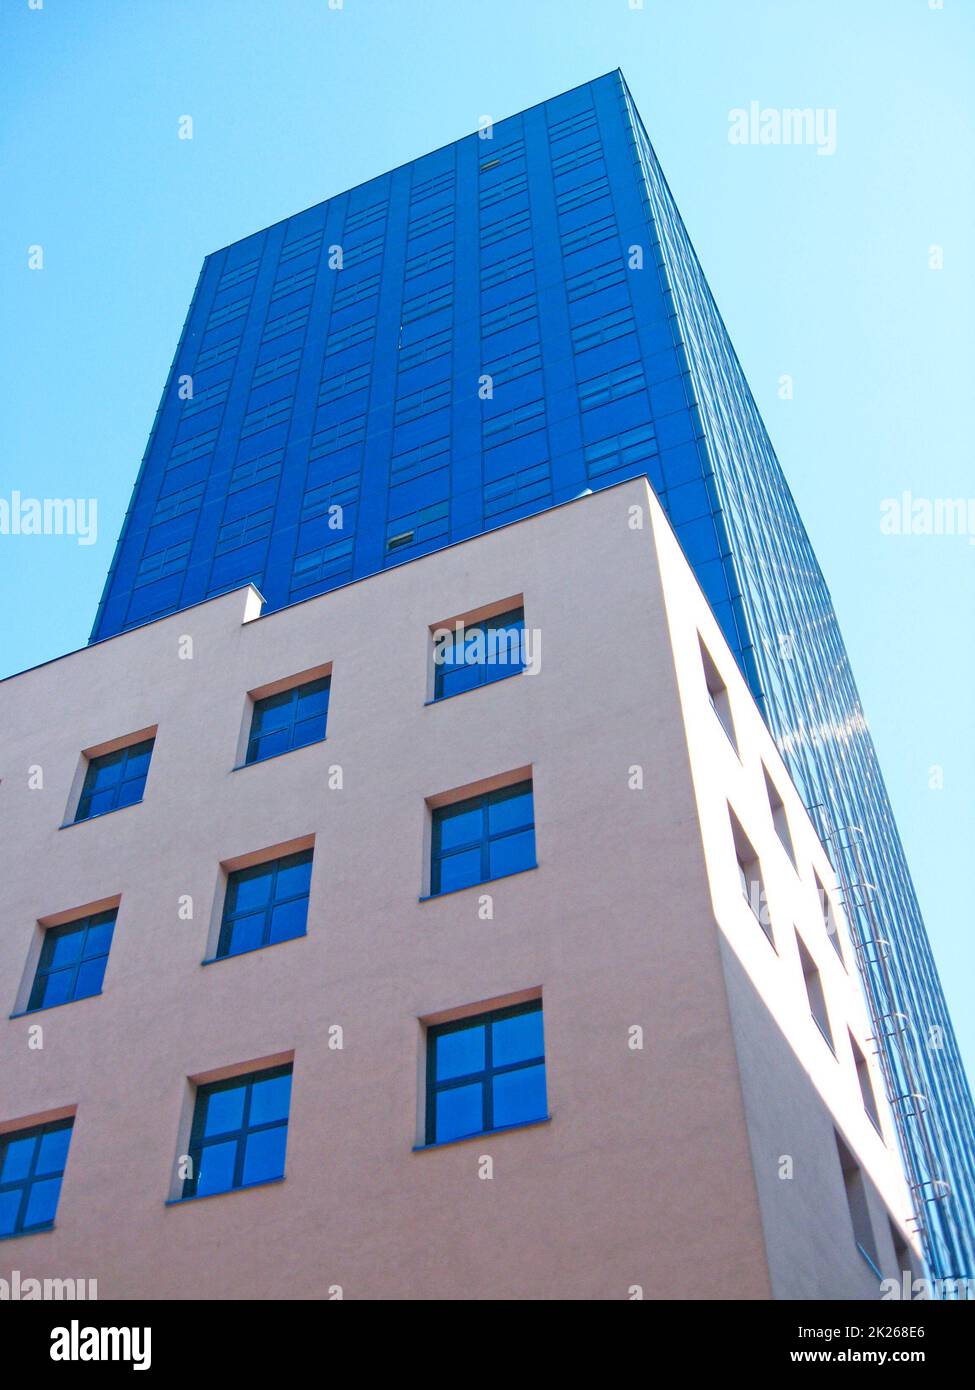 High glass skyscraper in Warsaw. Modern architecture of city buildings Stock Photo